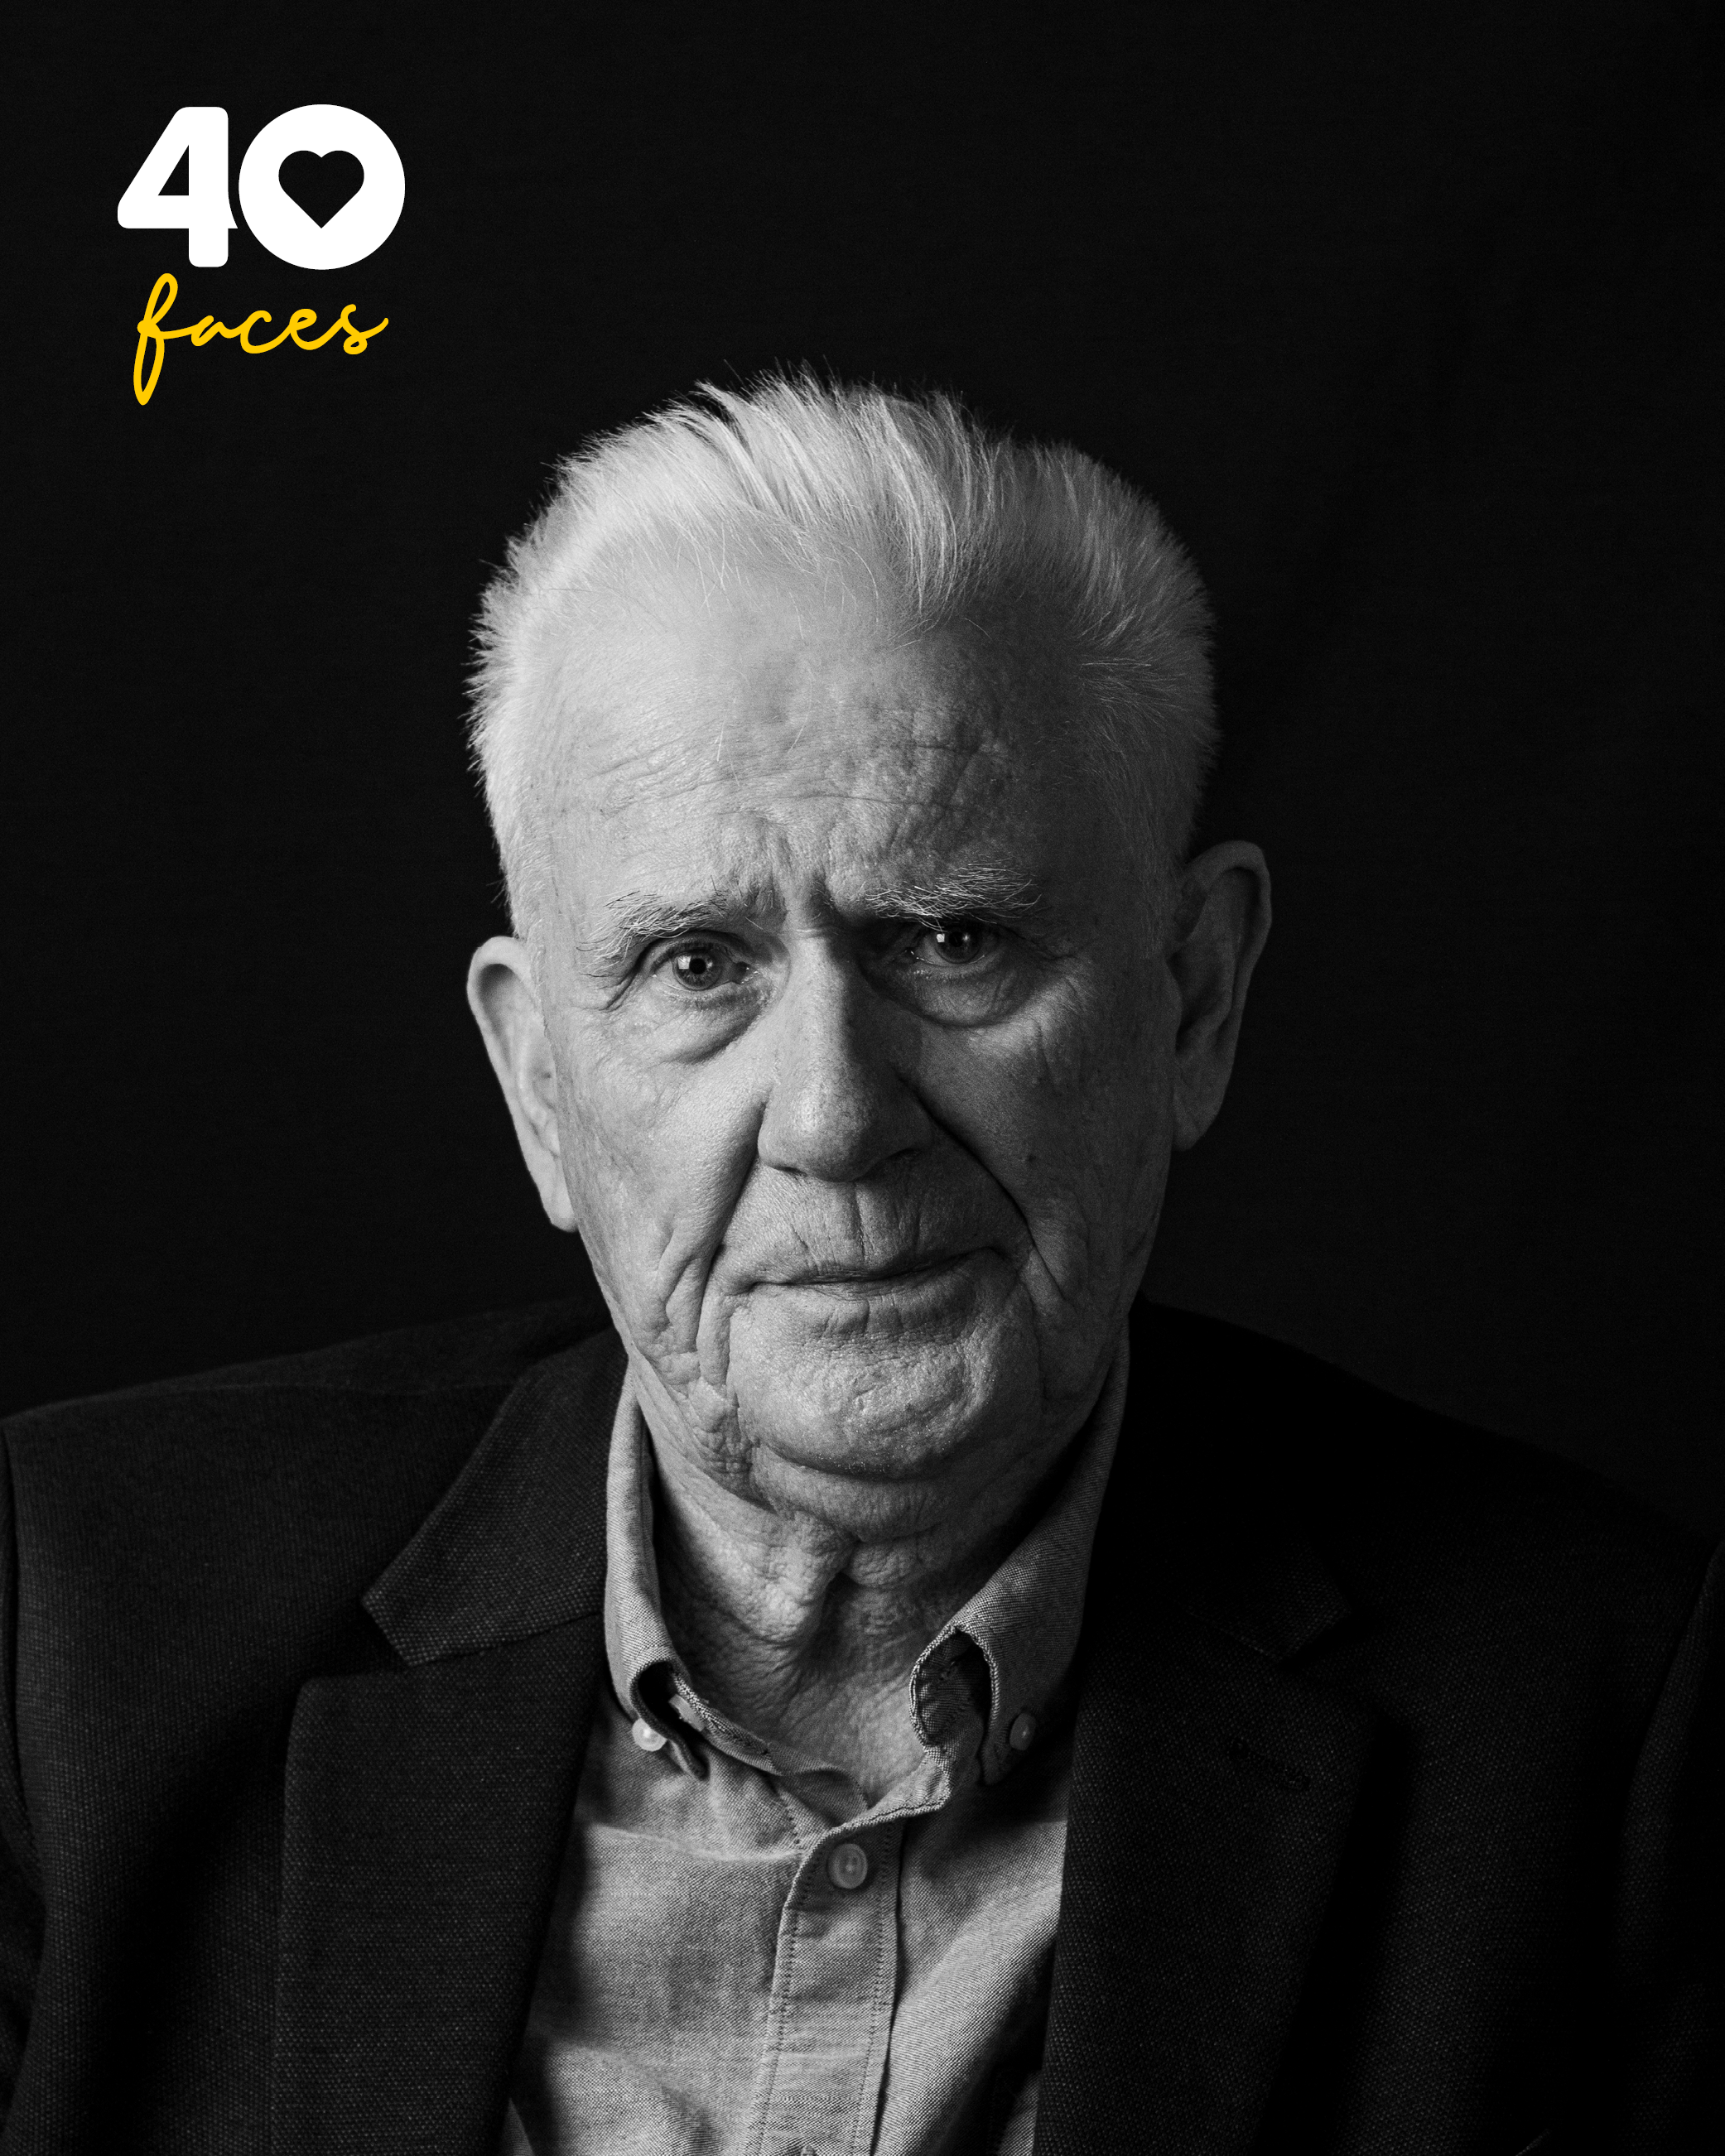 A Man, Bob Neilans, who is Honouree Lifetime President of St Barnabas Hospice, photographed in black and white, against a black backdrop